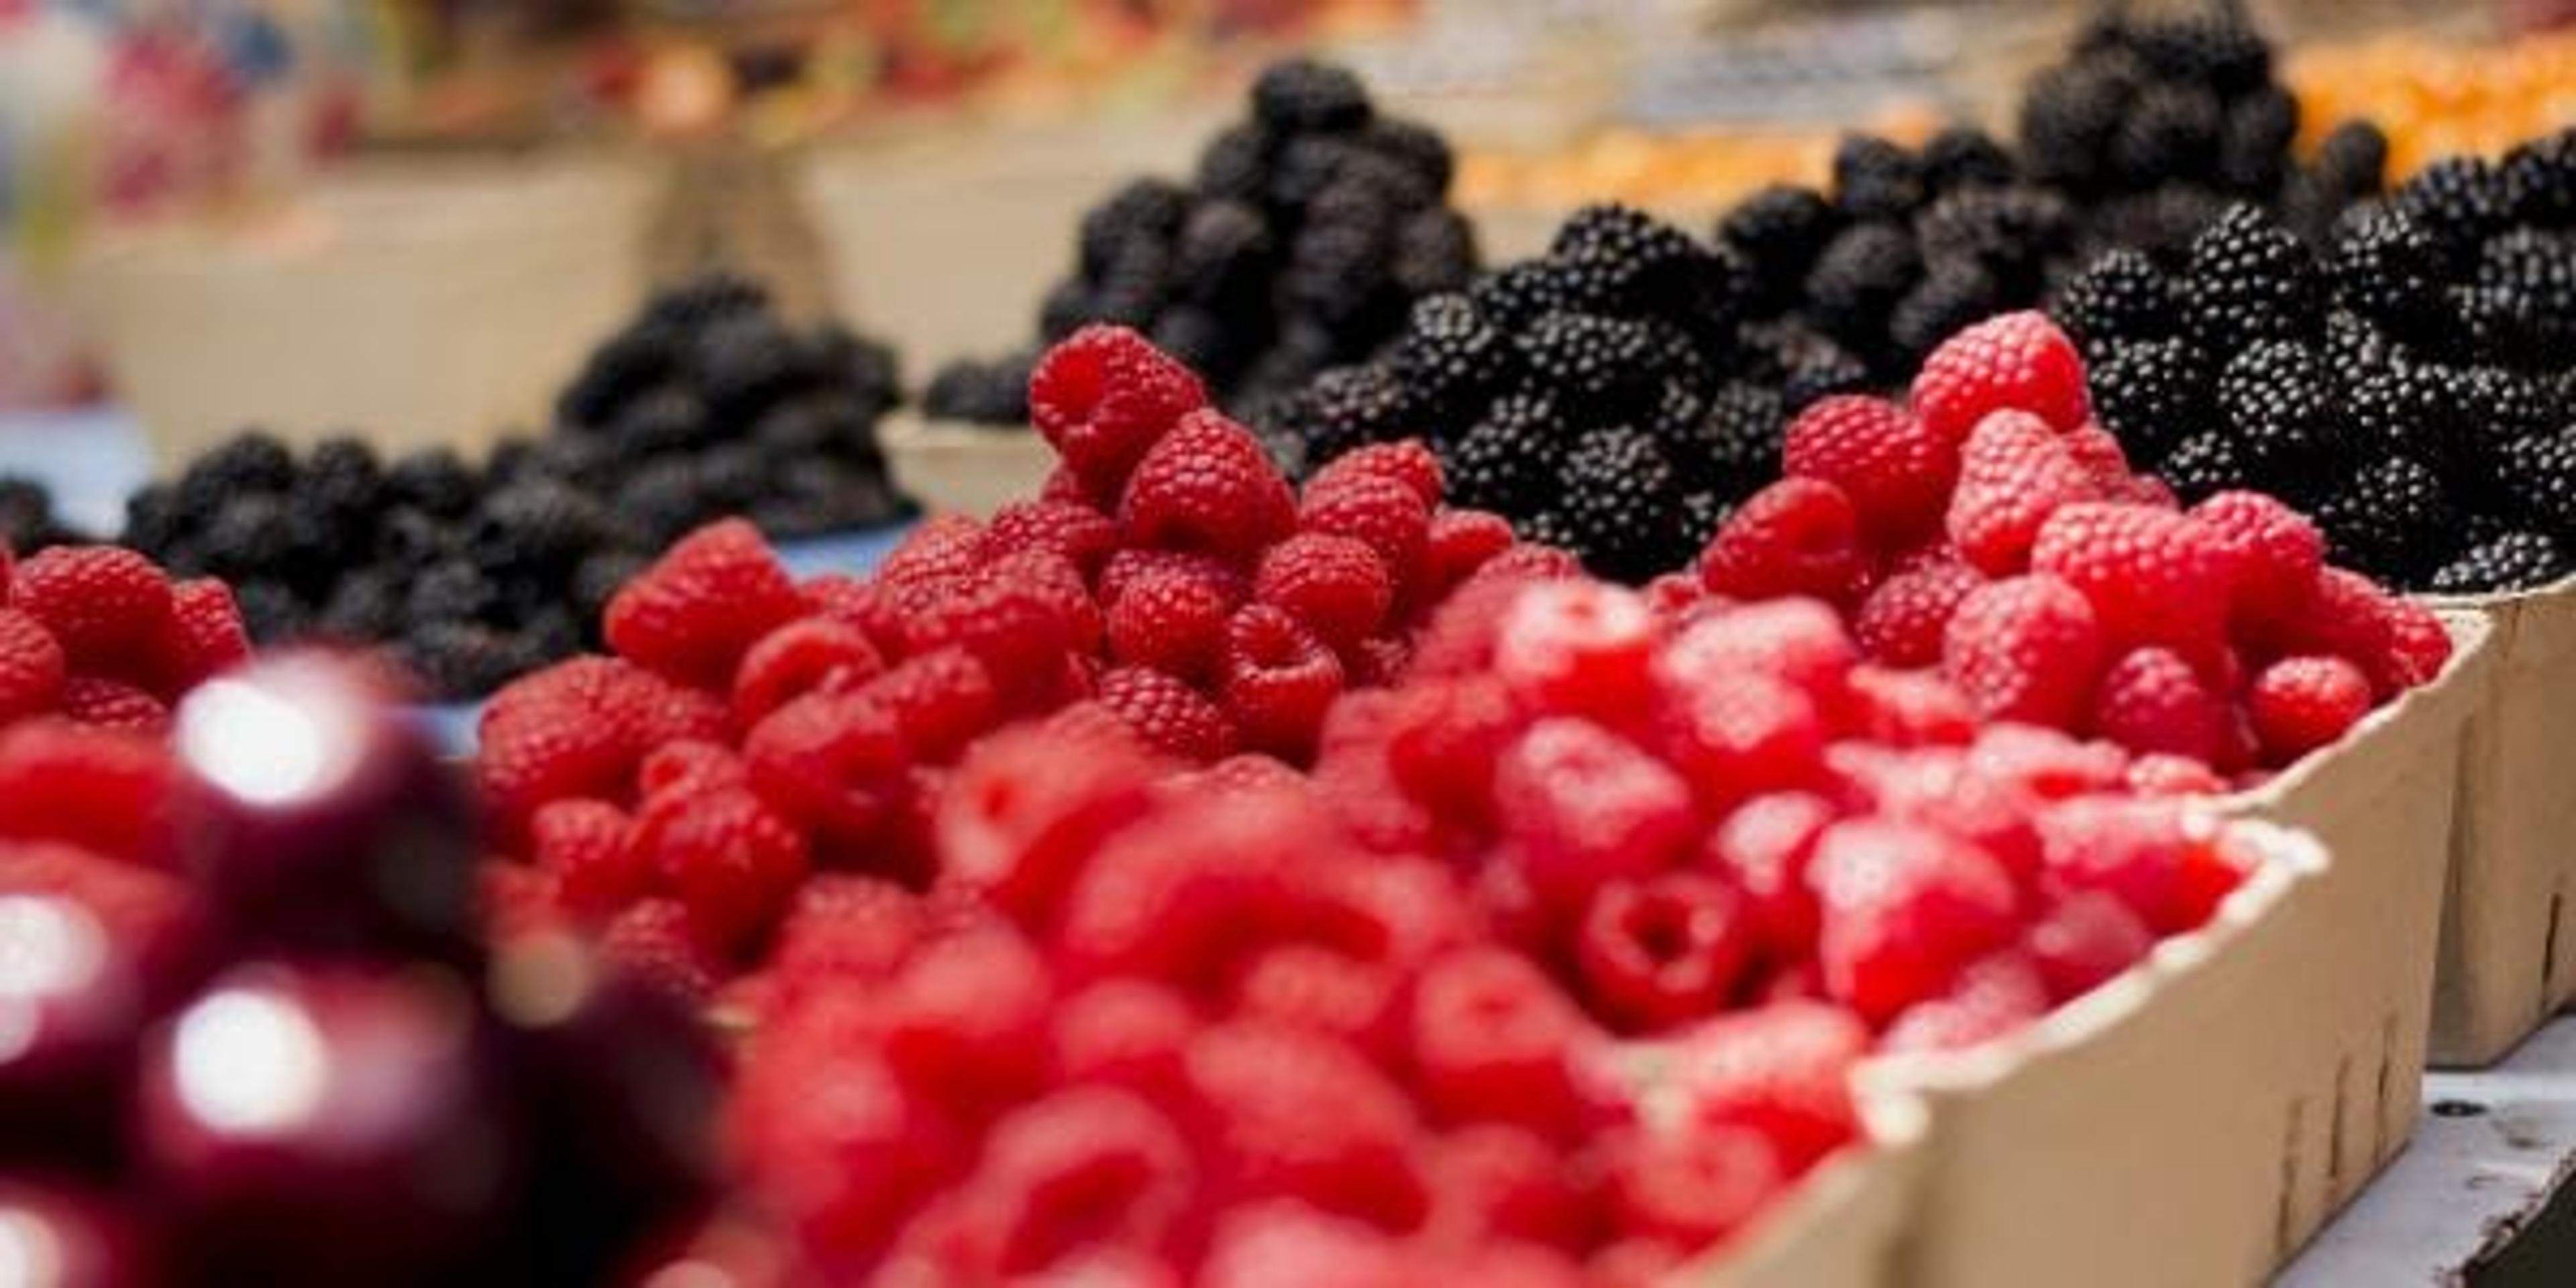 Berries on display at the farmers market